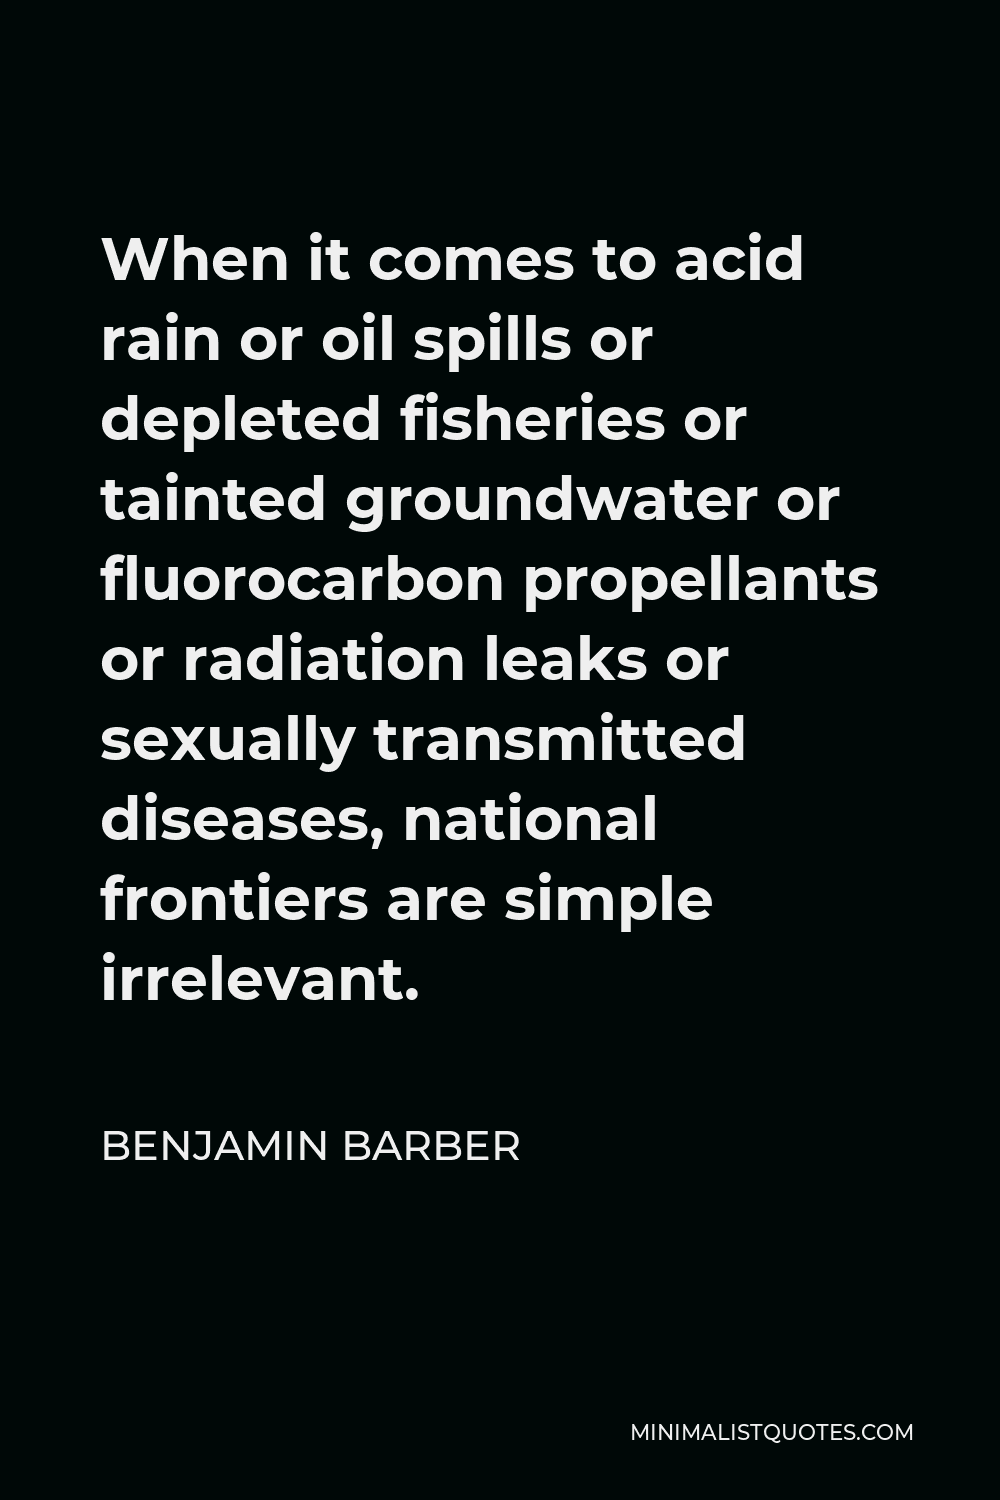 Benjamin Barber Quote - When it comes to acid rain or oil spills or depleted fisheries or tainted groundwater or fluorocarbon propellants or radiation leaks or sexually transmitted diseases, national frontiers are simple irrelevant.